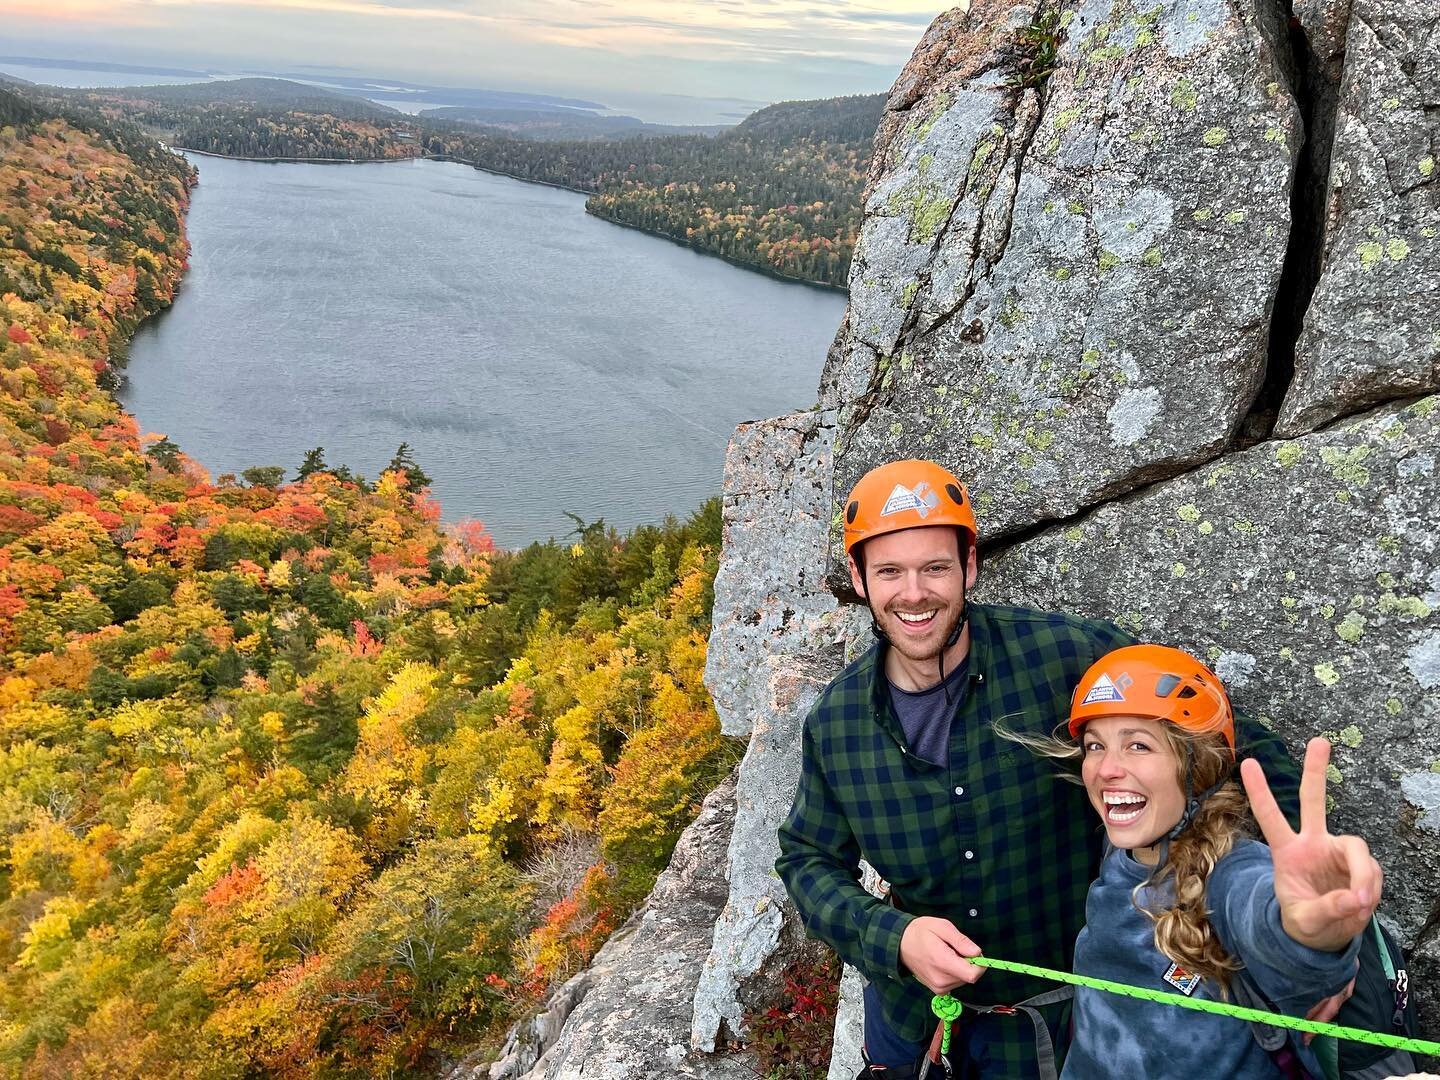 Treat your winter blues by signing up for some summer adventures!
Online reservations are now live at climbacadia.com. All courses are private and custom tailored to your needs.